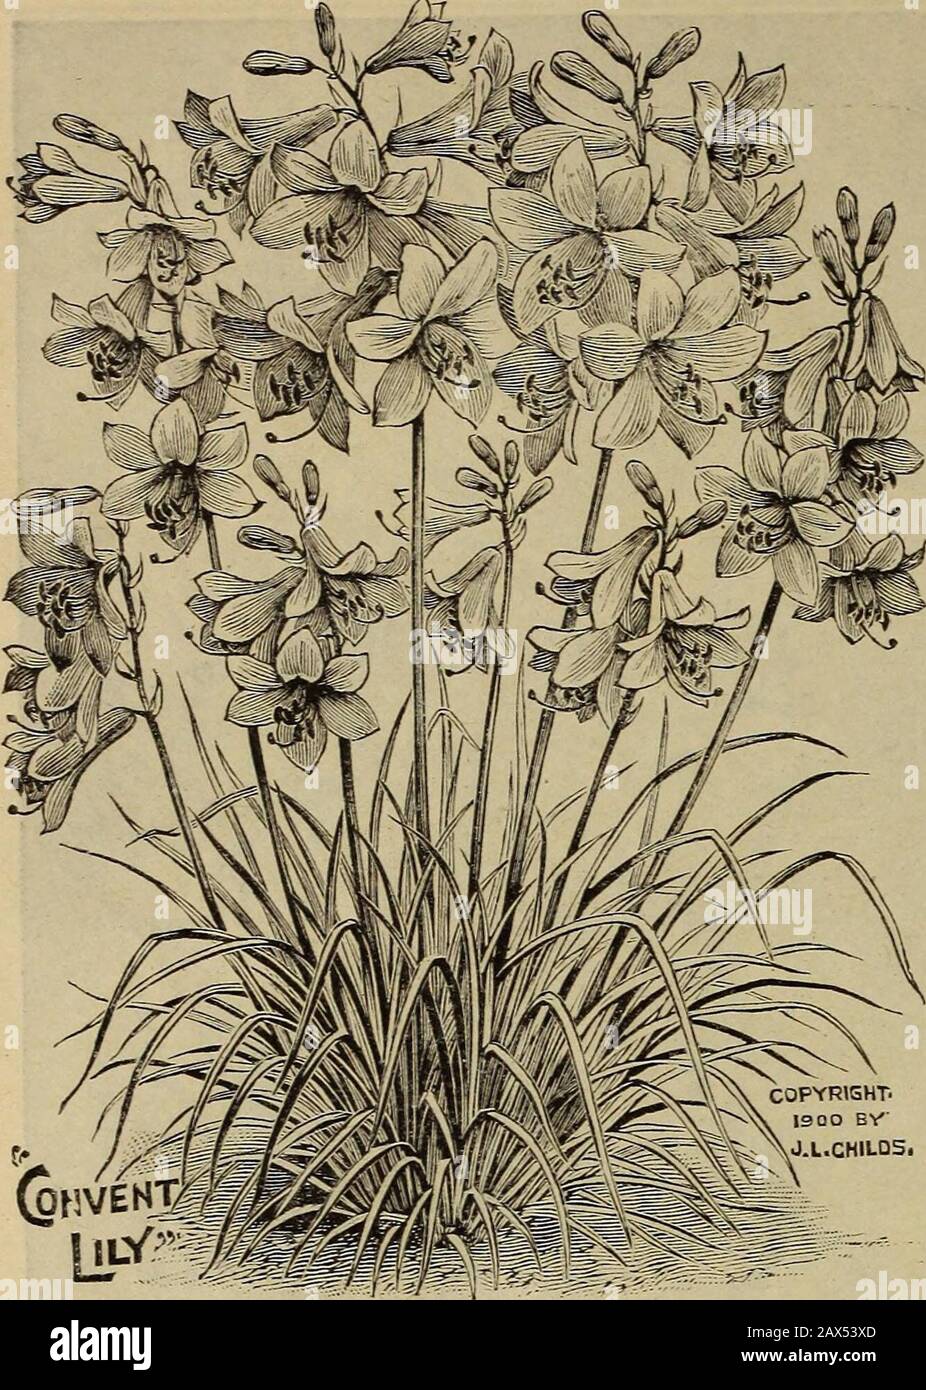 Childs' catalogue of fall bulbs that bloom plants, seeds, shrubs, fruits etcwith a treatise on the culture of bulbs indoors and out. . 56 JOHN LEWIS CHILD3, FLORAL PARK, N. Y.. Goi)Ver)t Lily. The equal of this plant(AnthuricumLiliastricum Major)is found only among some of the rare and high priced Lil-ies. Each plant sends up many tall flower stems, eachbearing a quantity of very large, pure white flowers, sur-passing the white Day Lily in size and beauty- Quite aspretty, in fact, as the Bermuda Easter Lily. Will attractgreat attention and is unsurpassed for cutting. A grandgood thing, and per Stock Photo